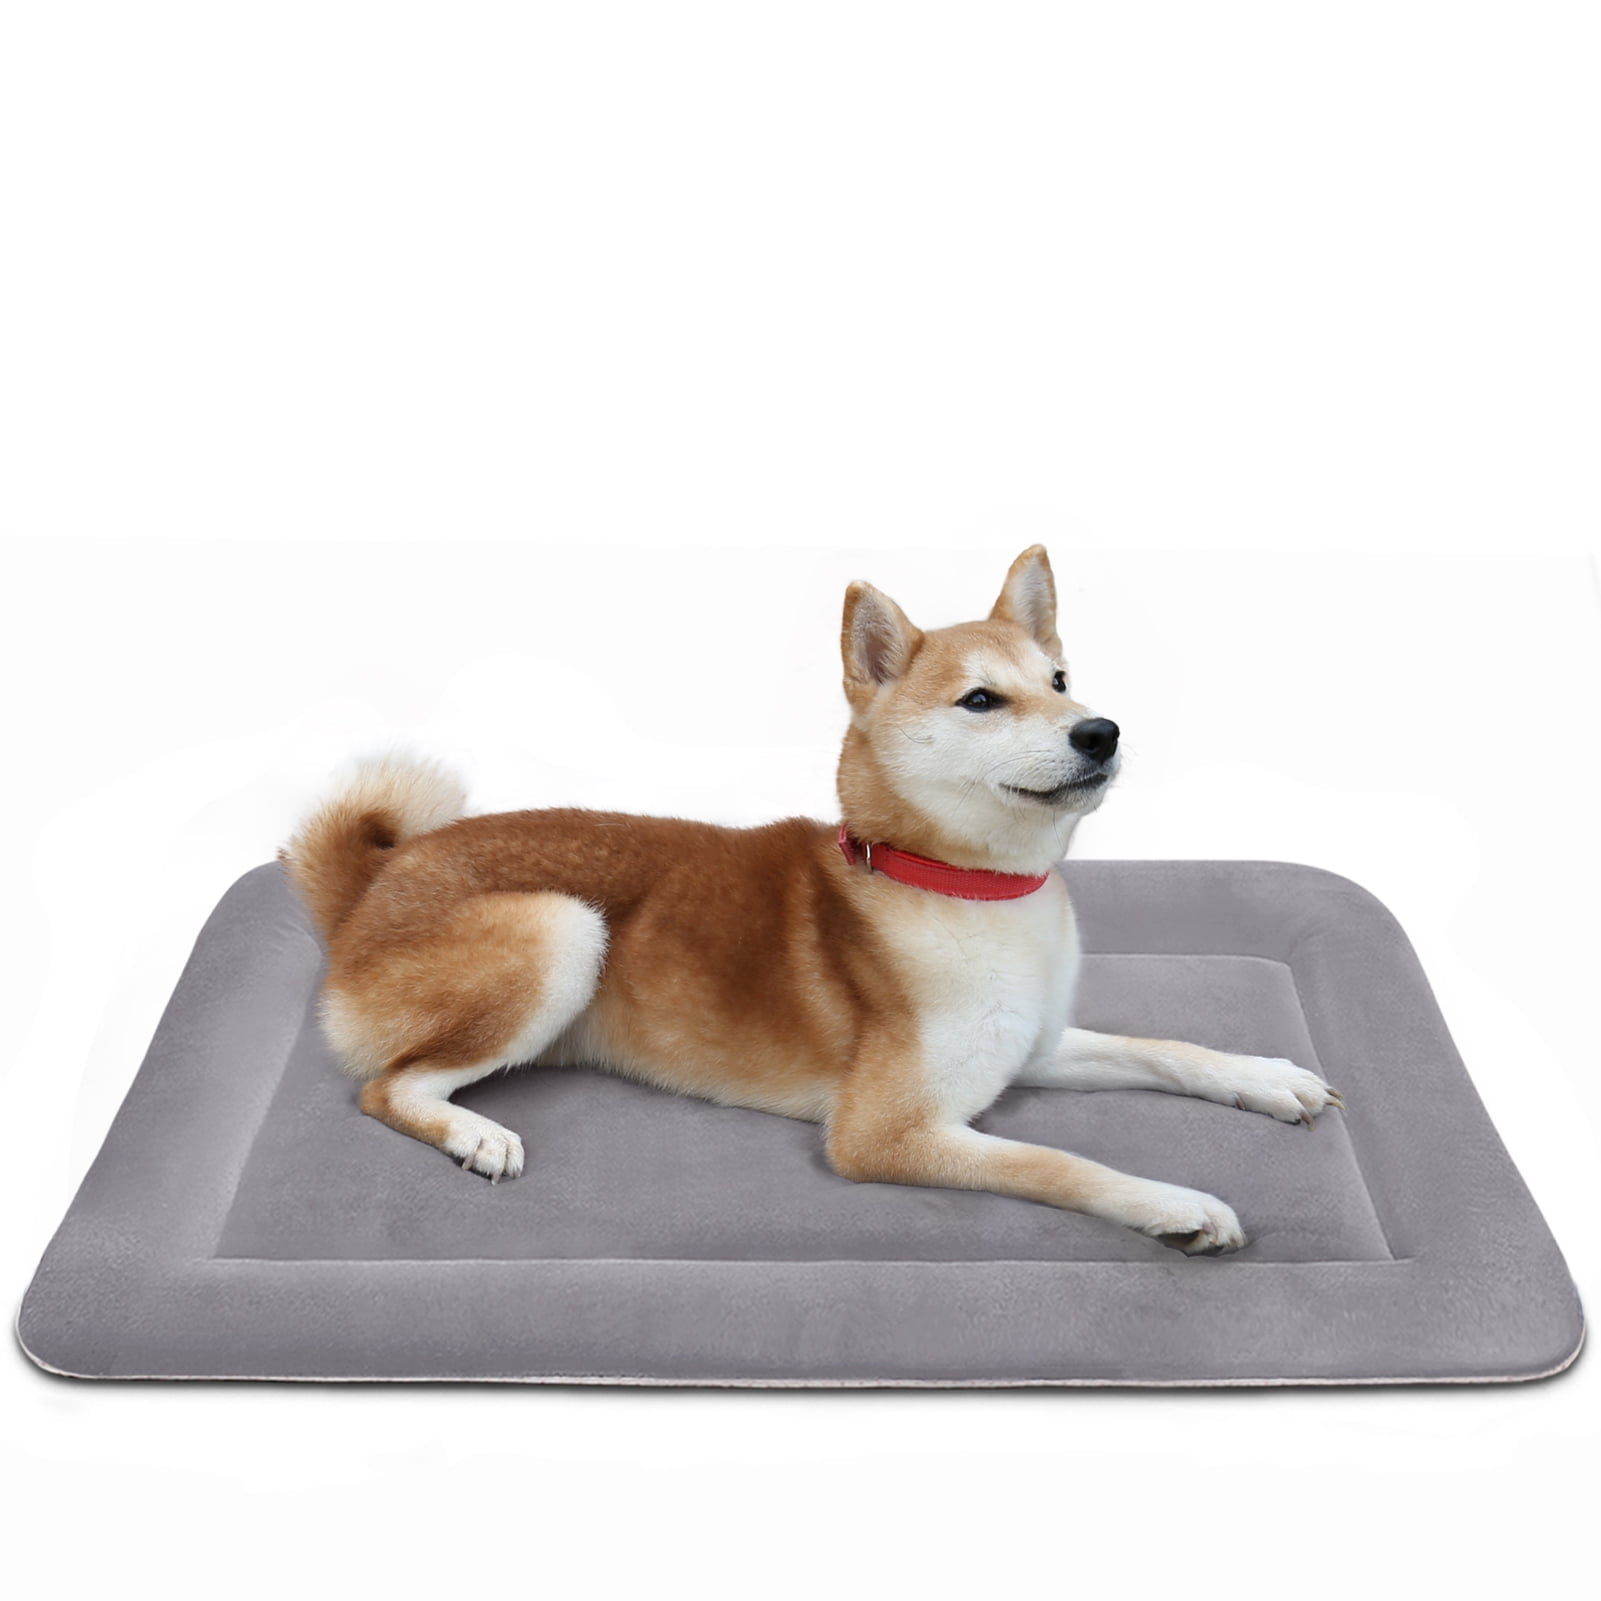 Magic Dog Large Dog Bed Crate Pad Mat Orthopedic Pet Beds 39 Inch Washable Anti Slip Dog Sleeping Mattress with Removable Cover Dark Brown L